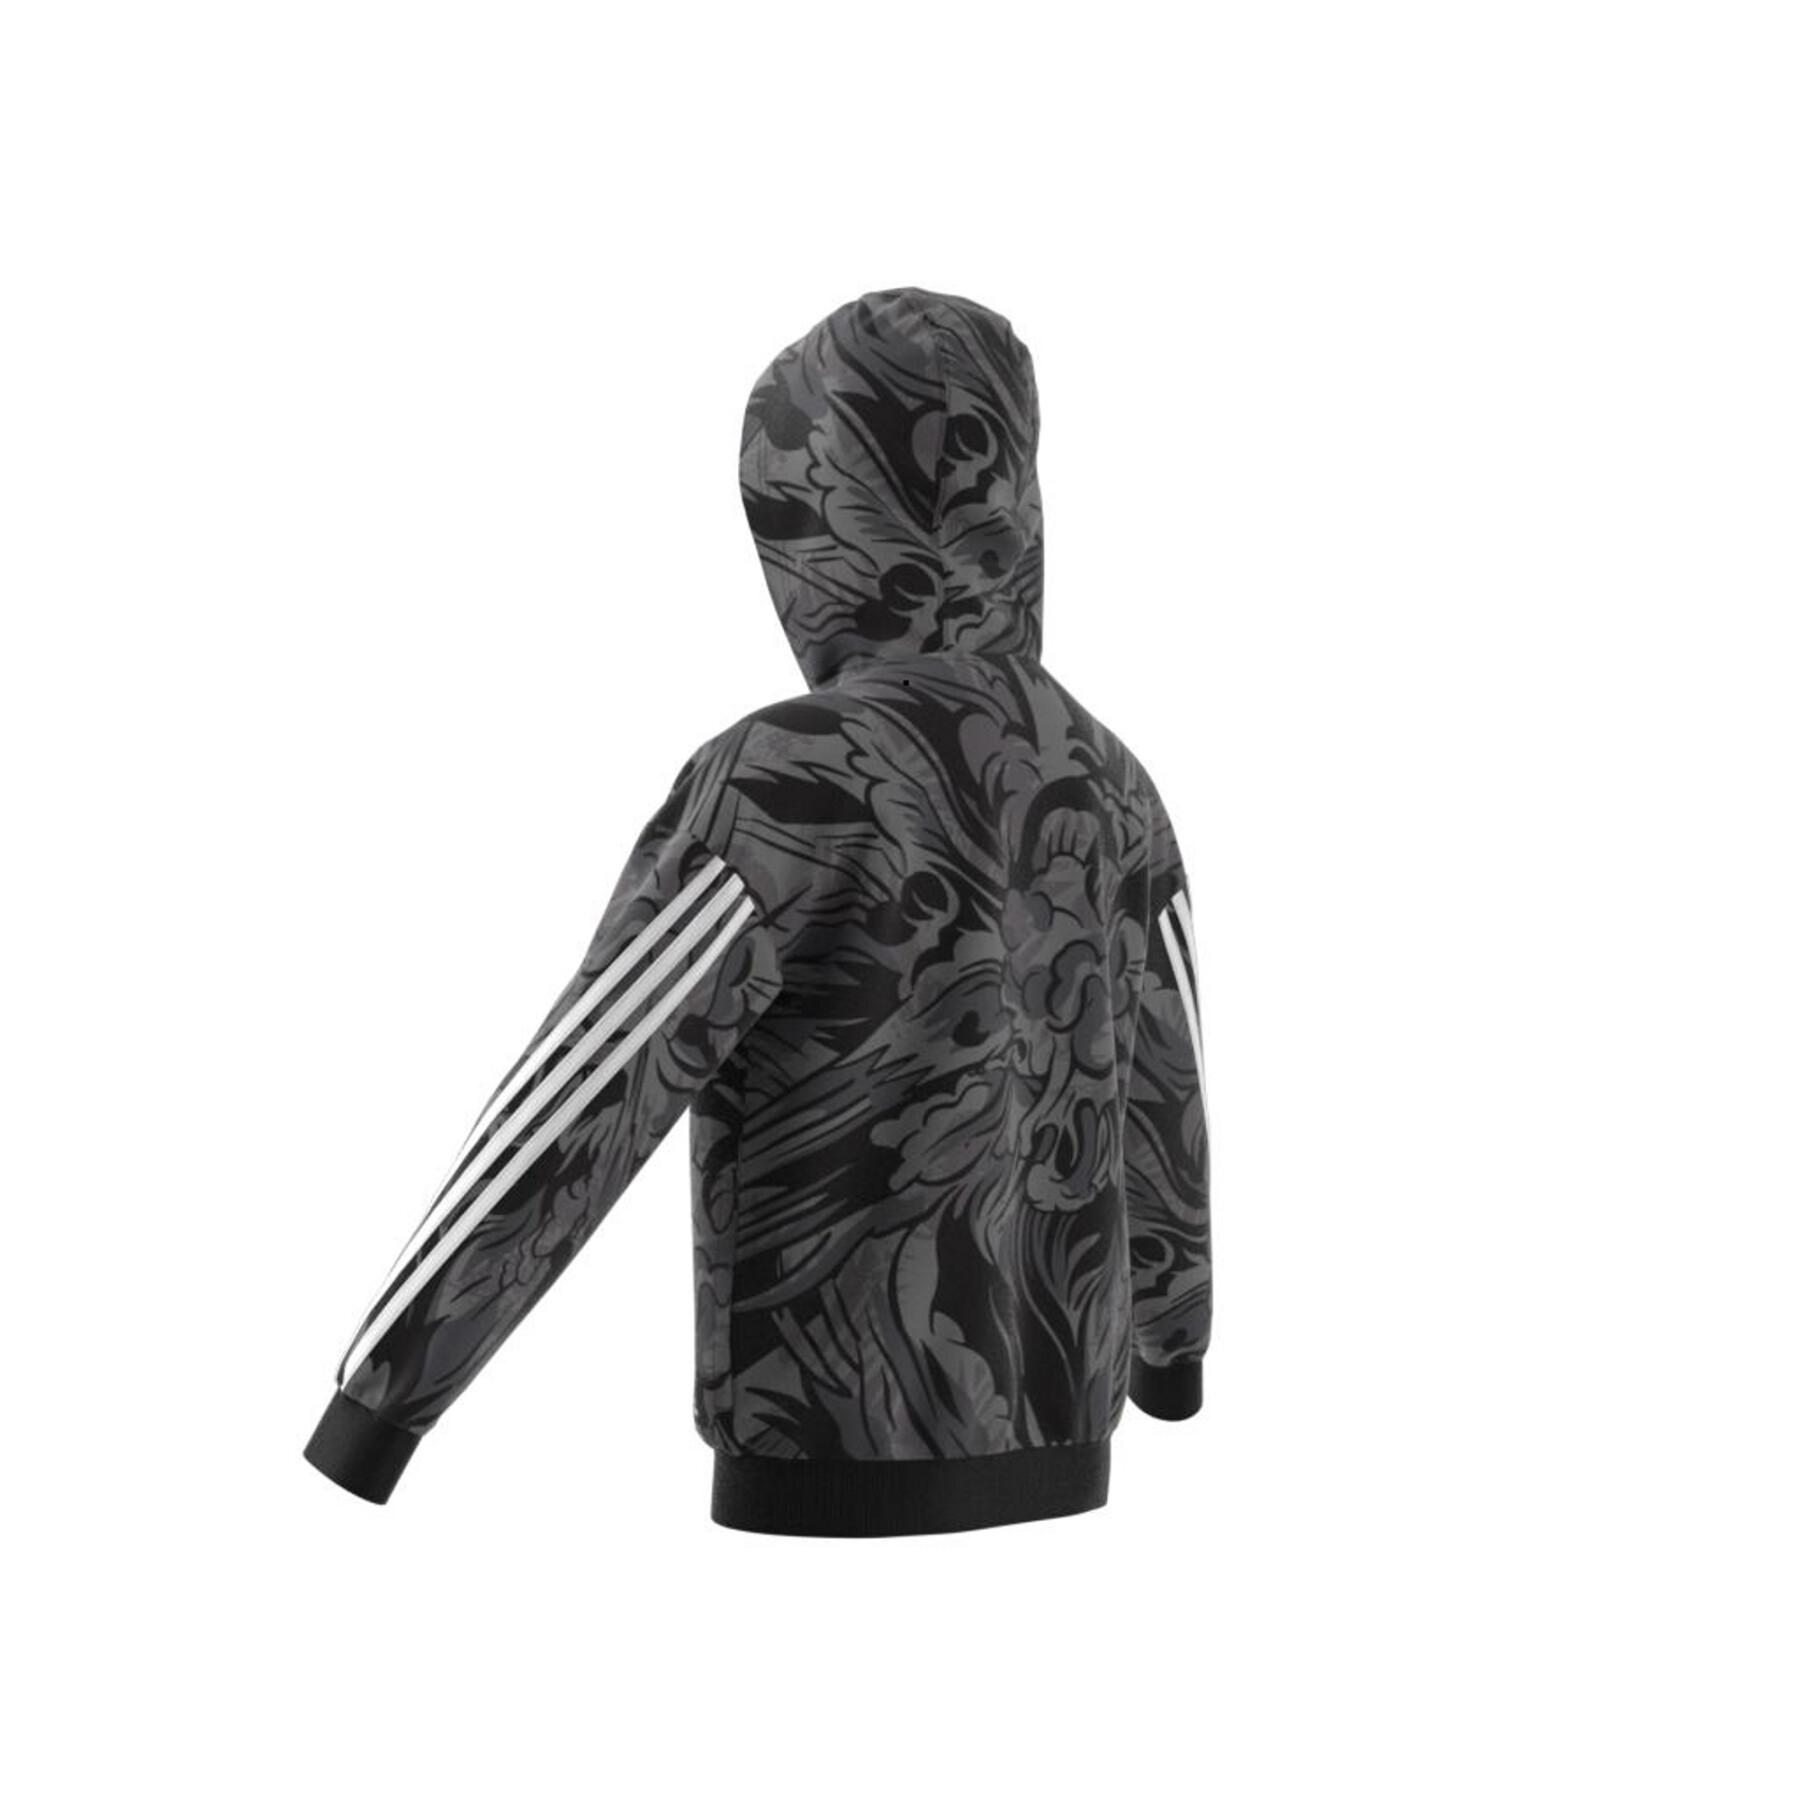 Casaco criança adidas ARKD3 Relaxed Graphic Full-Zip